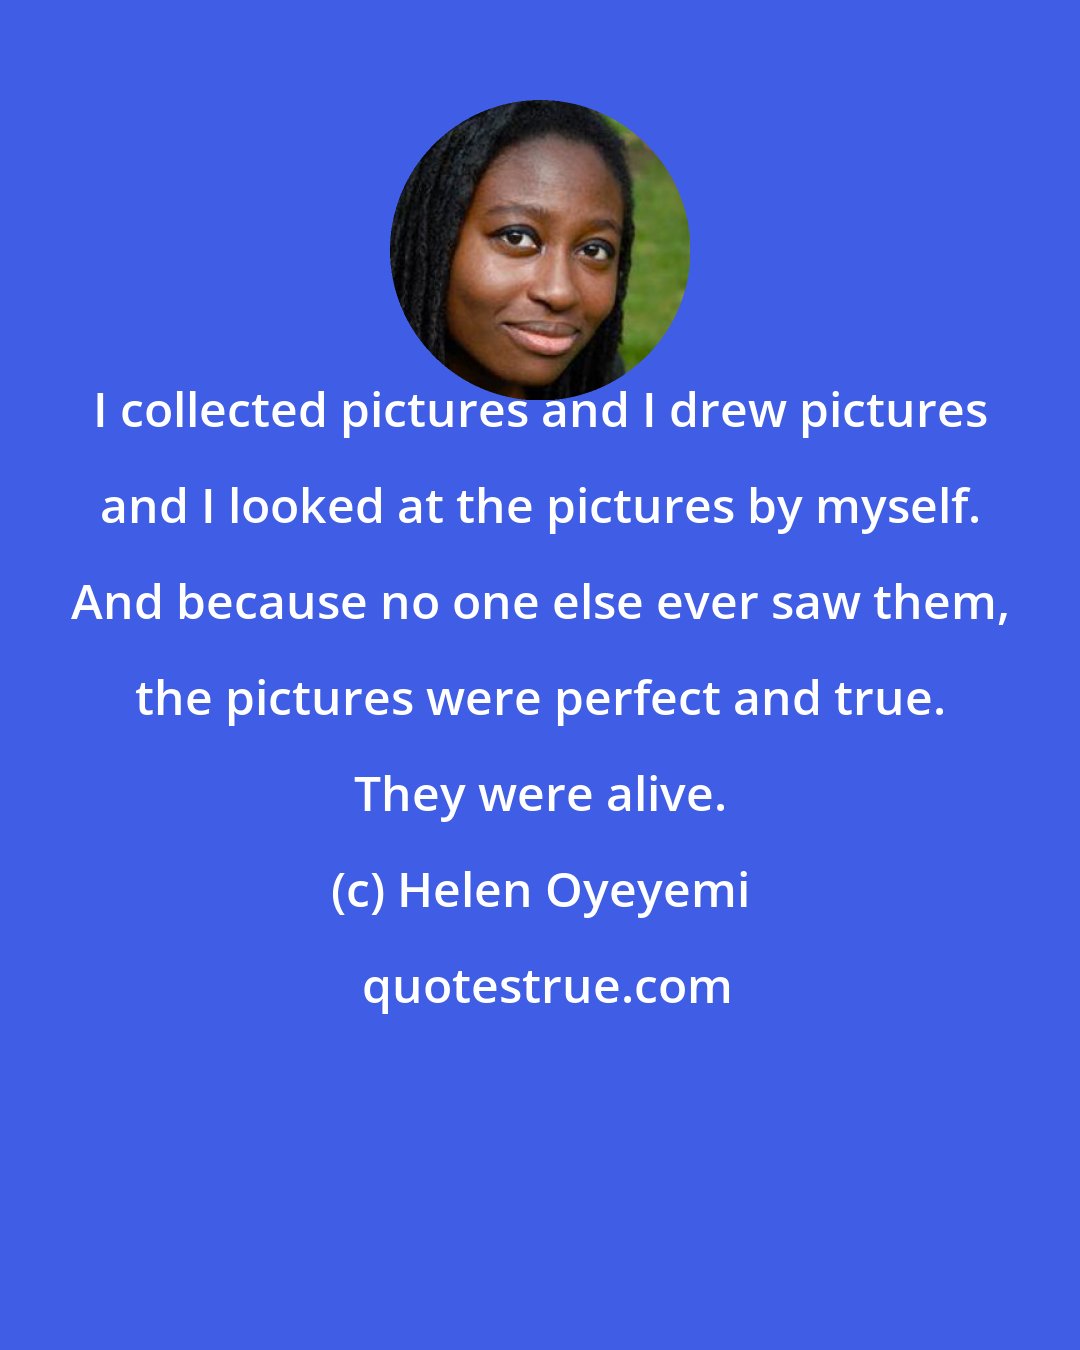 Helen Oyeyemi: I collected pictures and I drew pictures and I looked at the pictures by myself. And because no one else ever saw them, the pictures were perfect and true. They were alive.